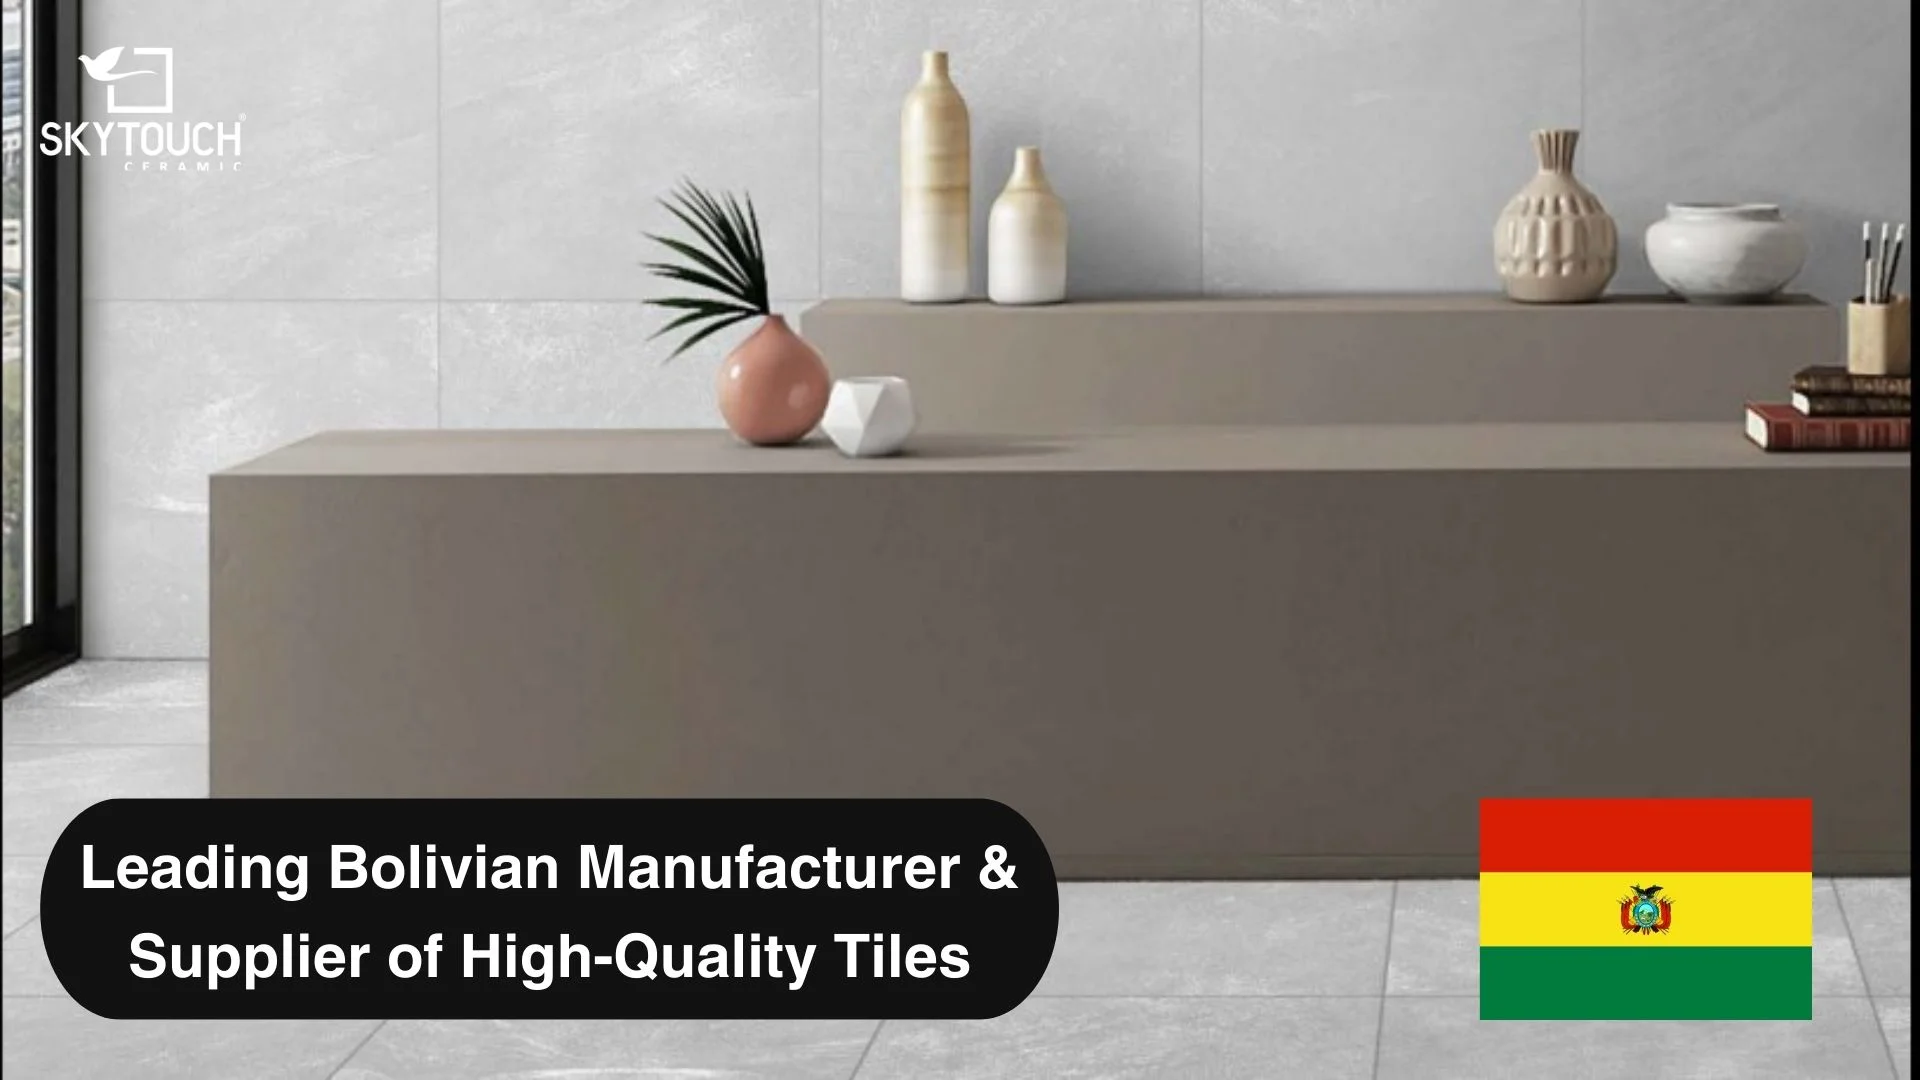 Leading Bolivian Manufacturer & Supplier of High-Quality Tiles